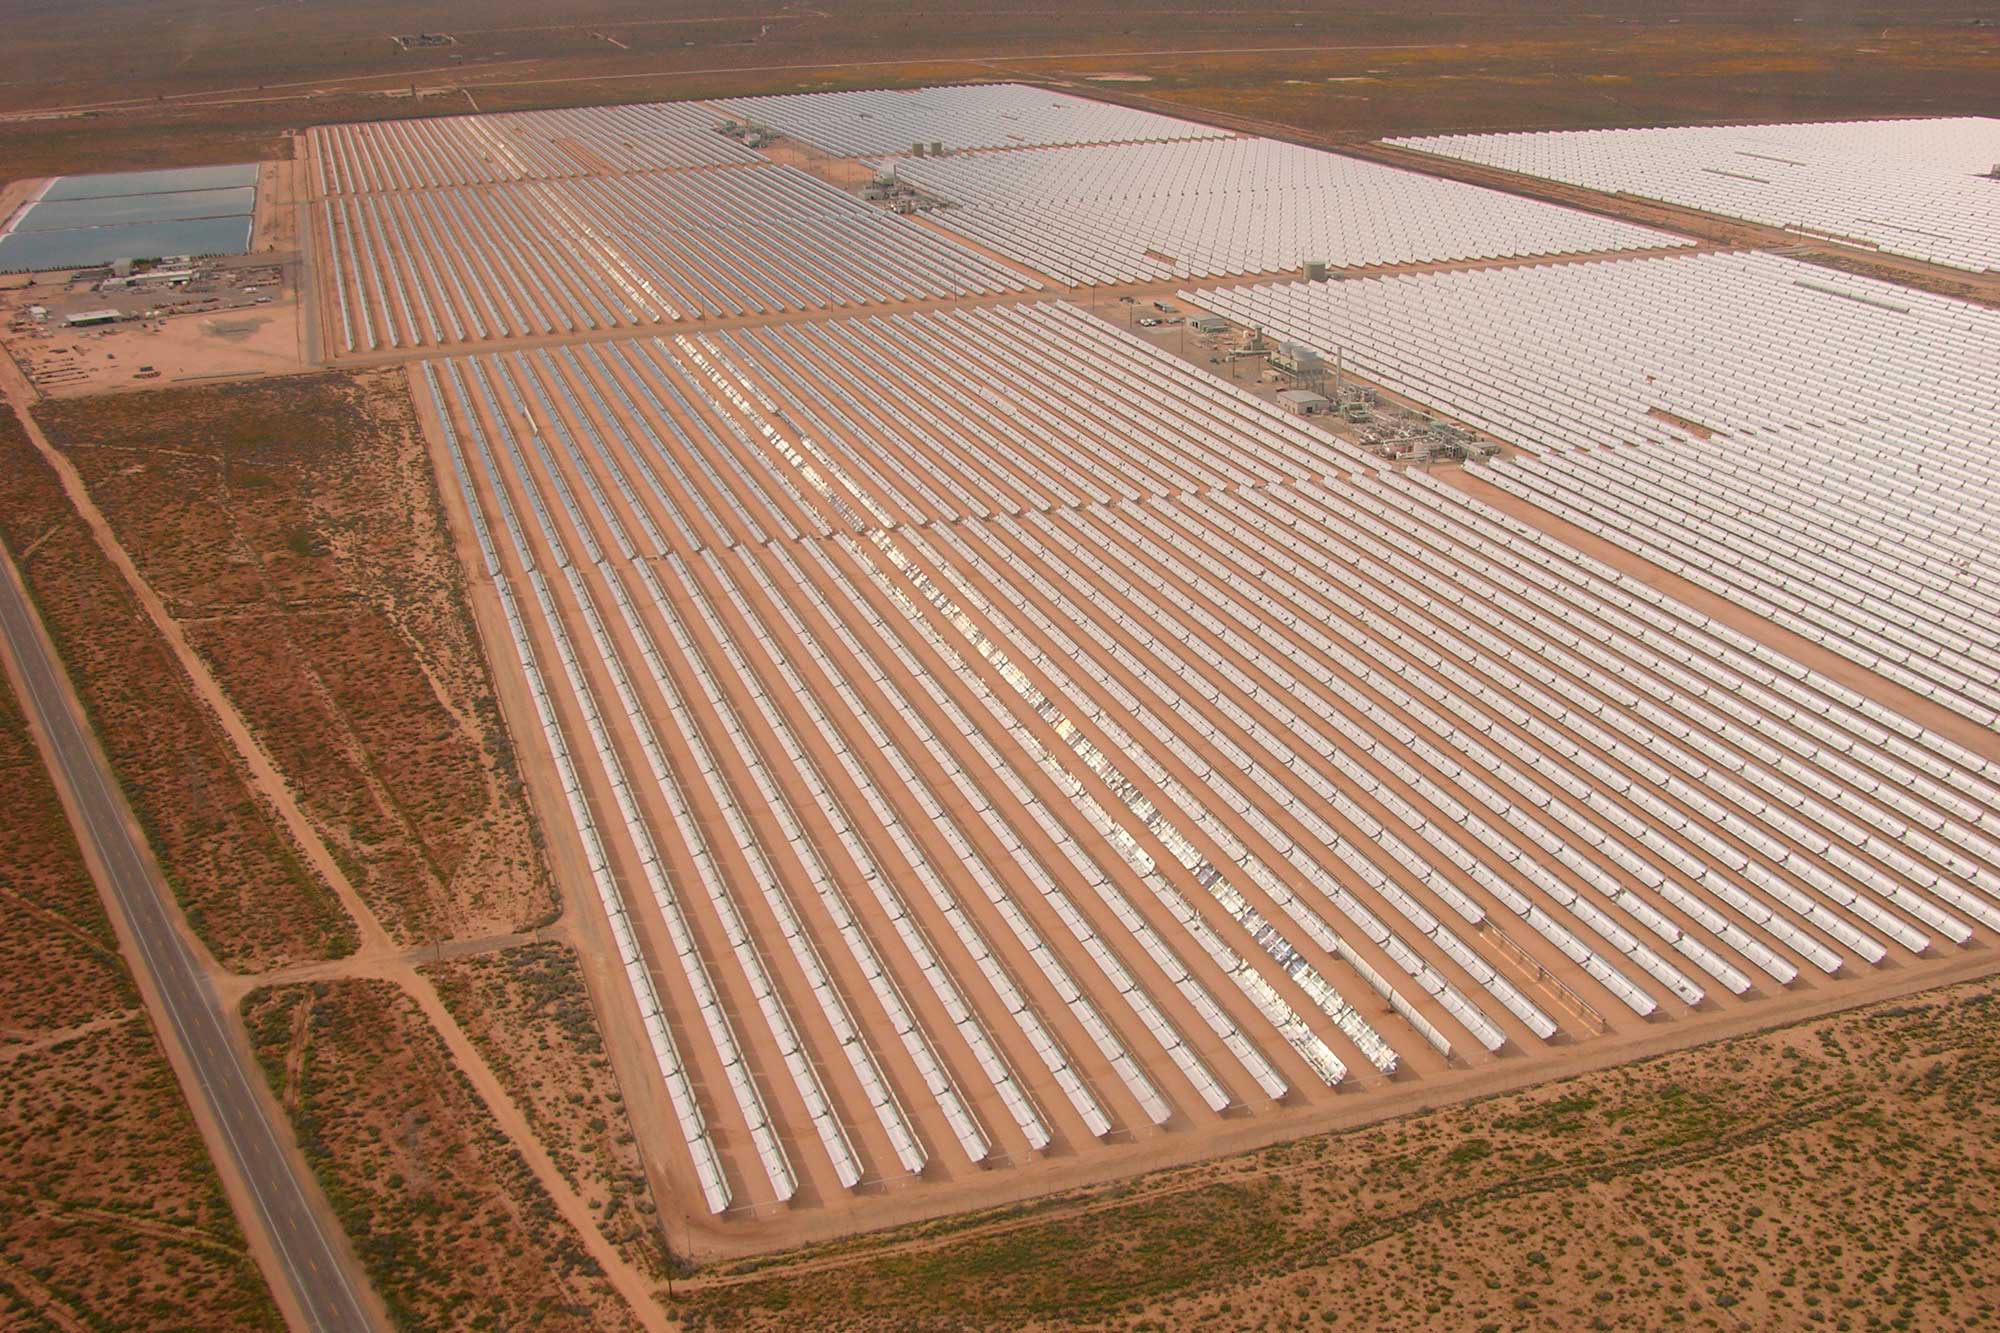 Photograph of a solar farm in the Mojave Desert of California. The image shows rows of solar collectors arrayed on the landscape.